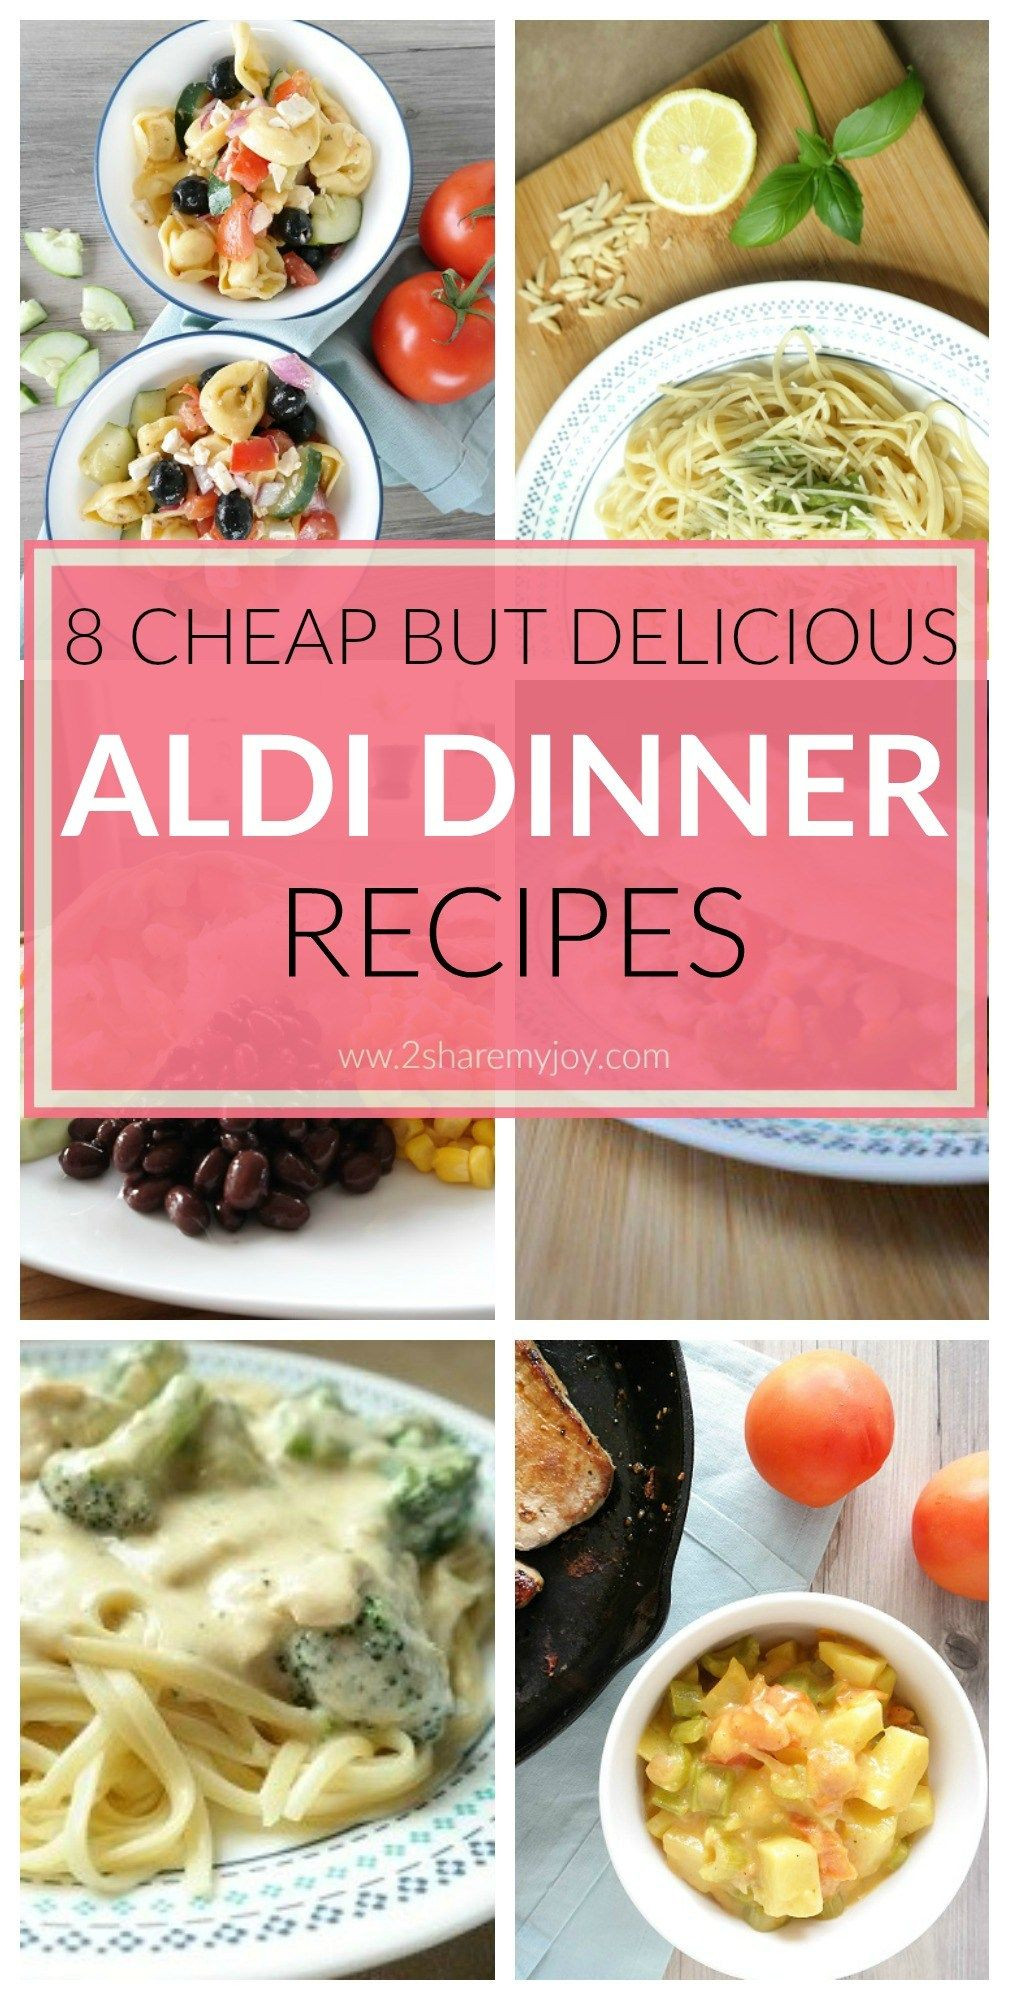 Healthy Dinners For Two On A Budget
 20 Aldi Meals – Cheap Dinner Recipes Under $2 Per Serving